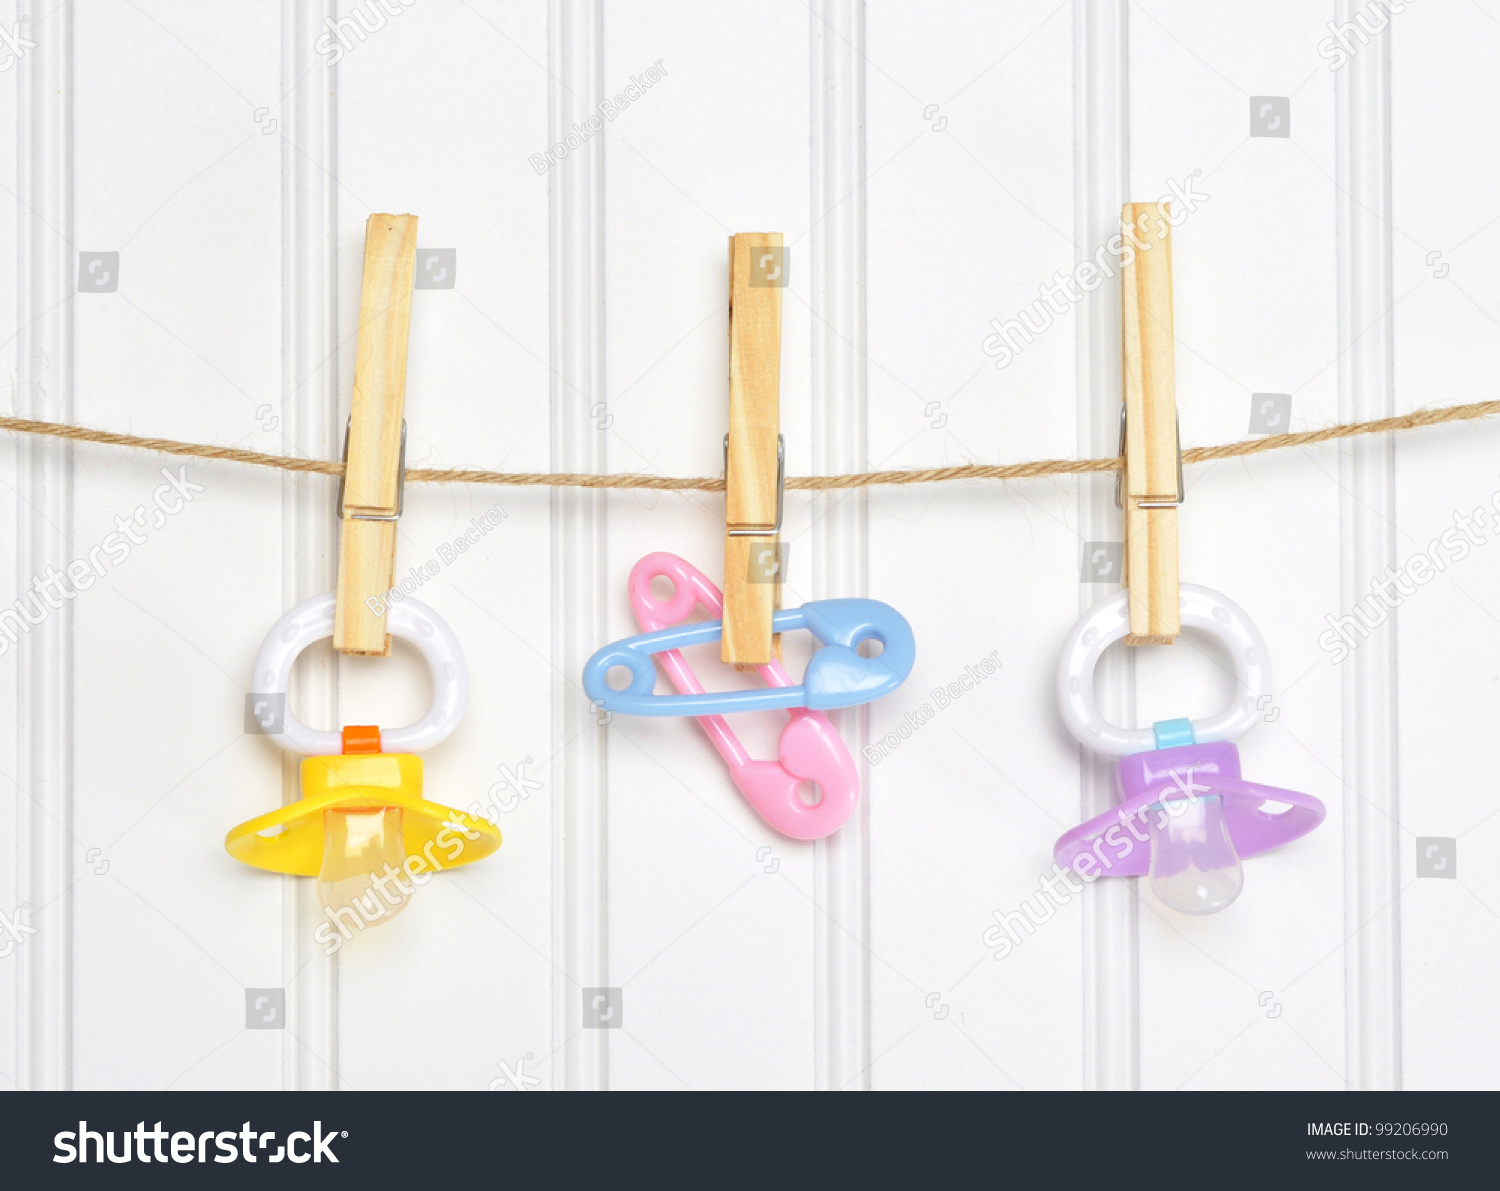 Baby Pacifier Binky Pink on a Clothesline on White. #99206990